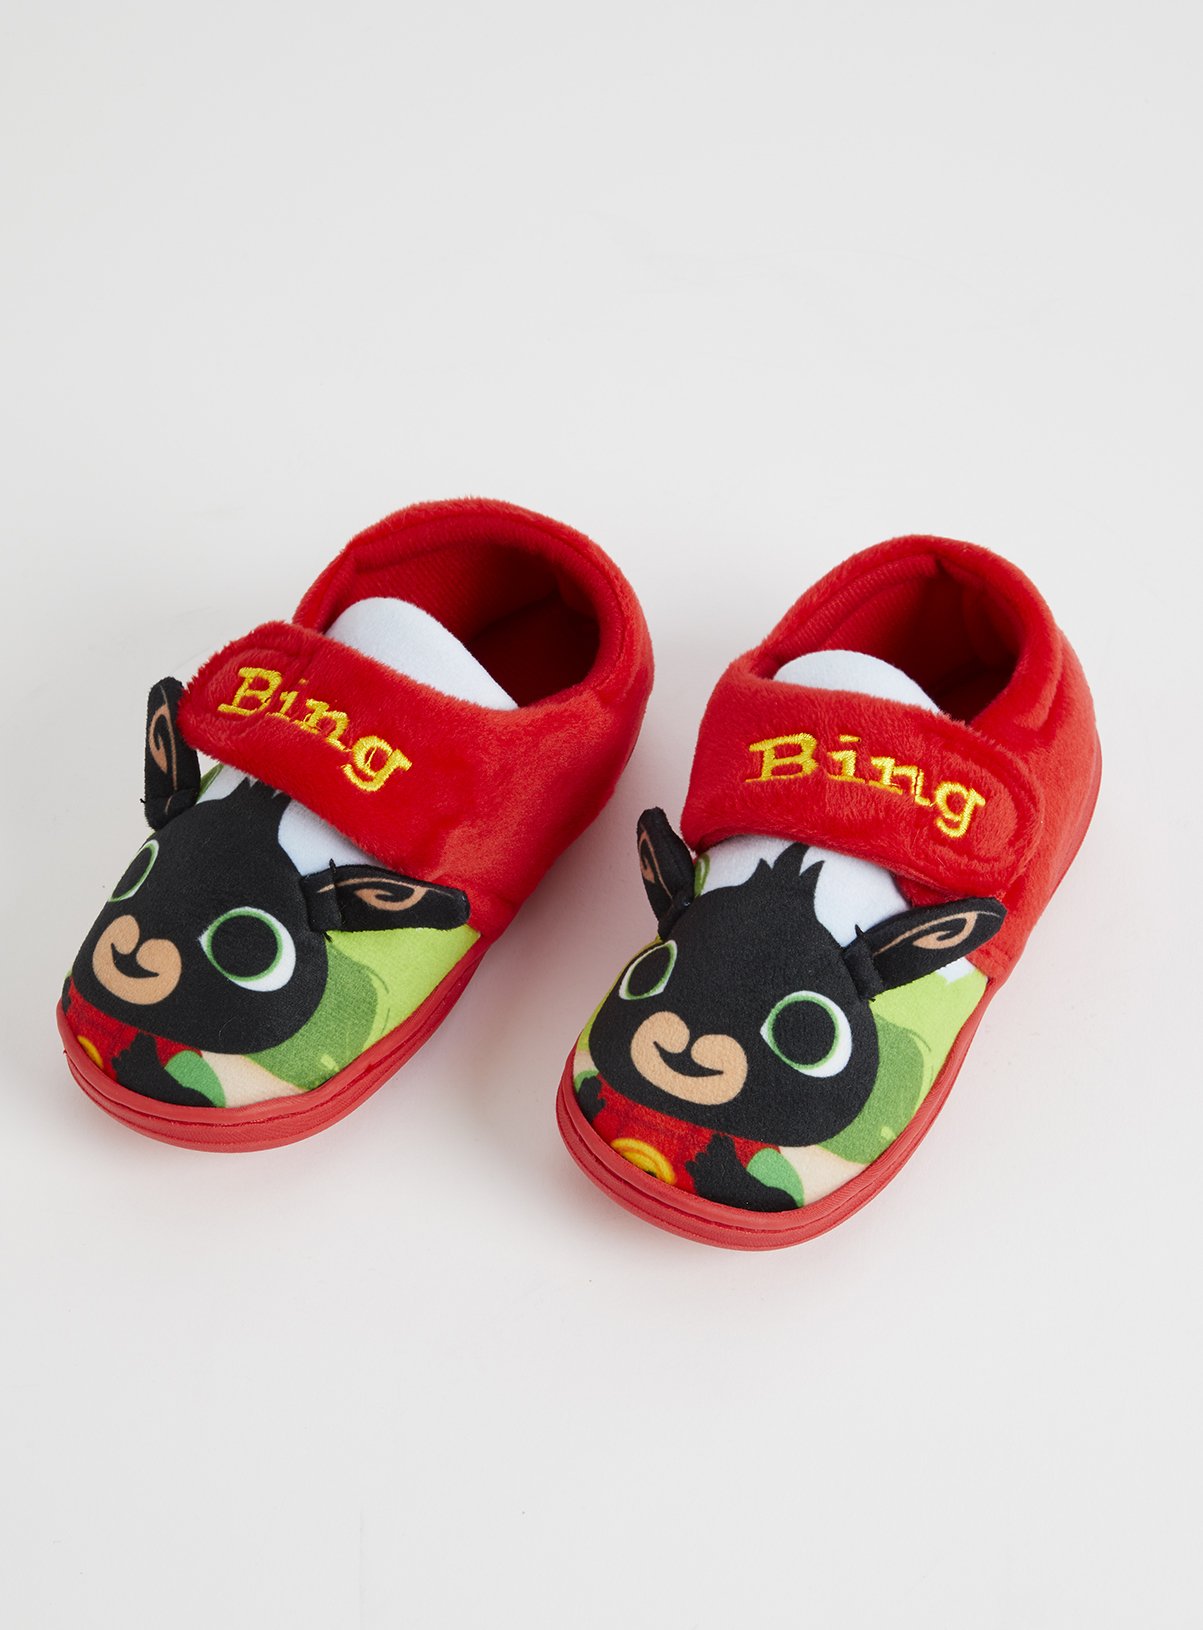 size 7 infant slippers